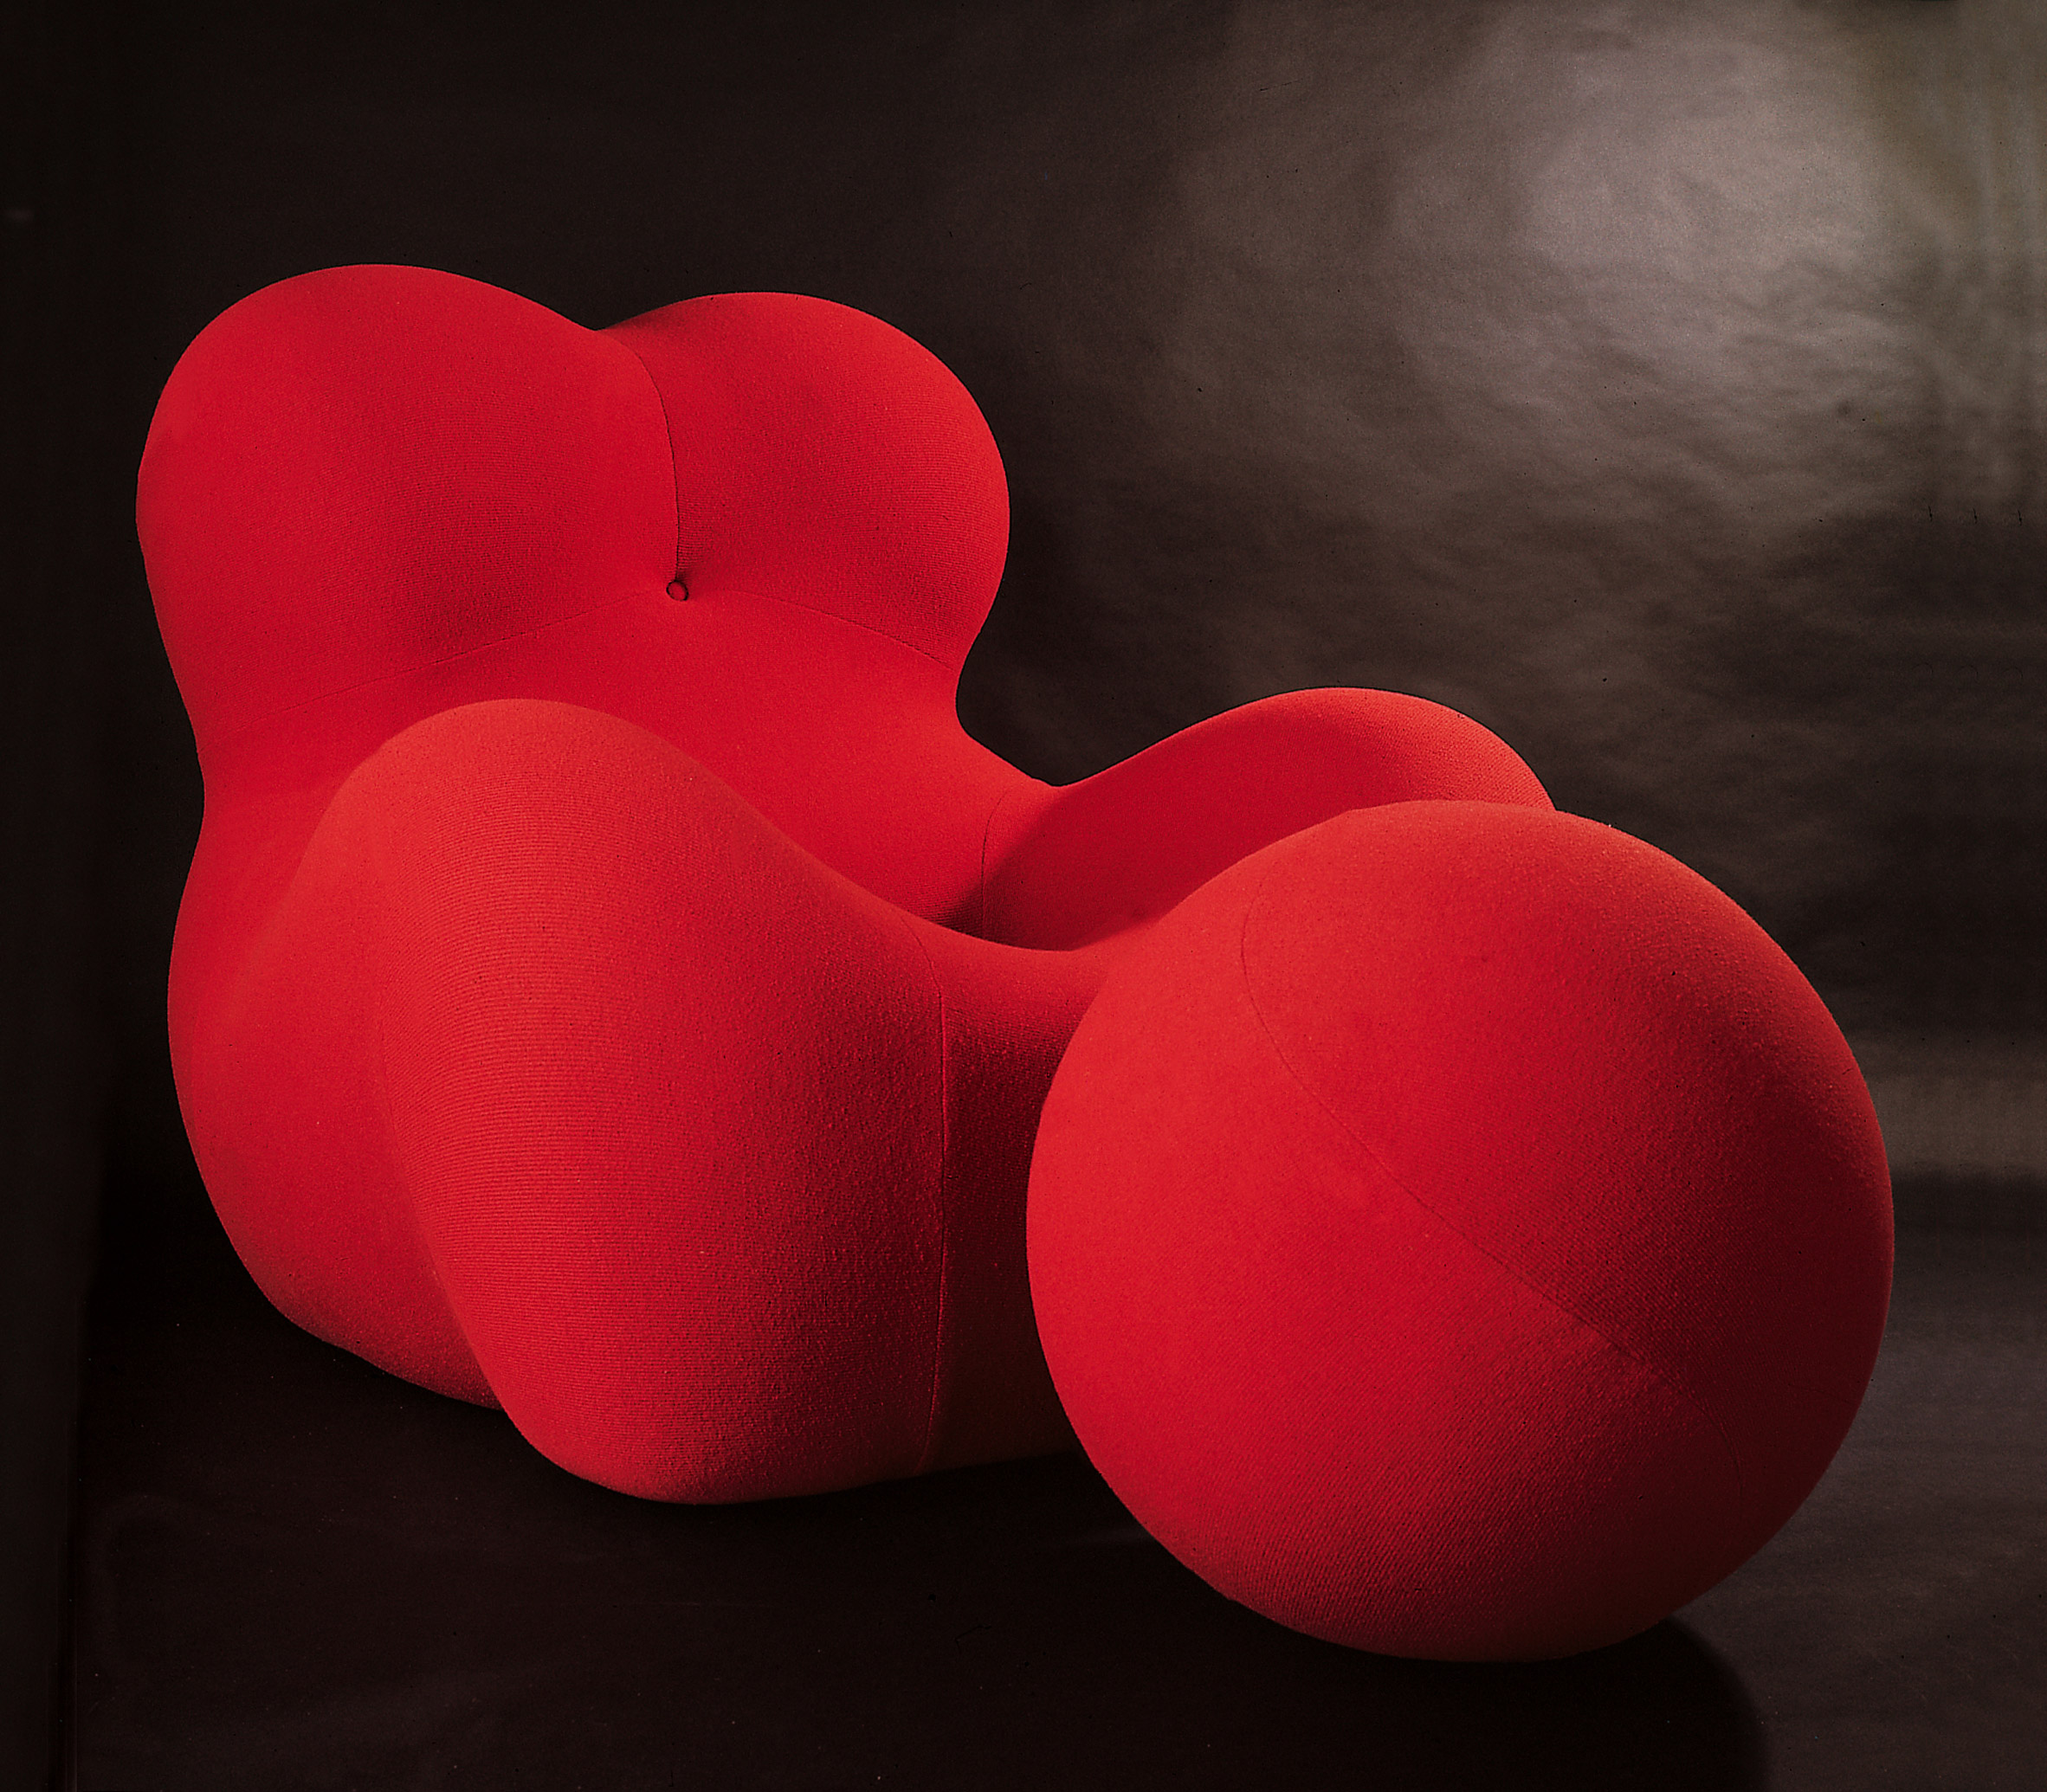 Up5 chair and Up6 ottoman by Gaetano Pesce